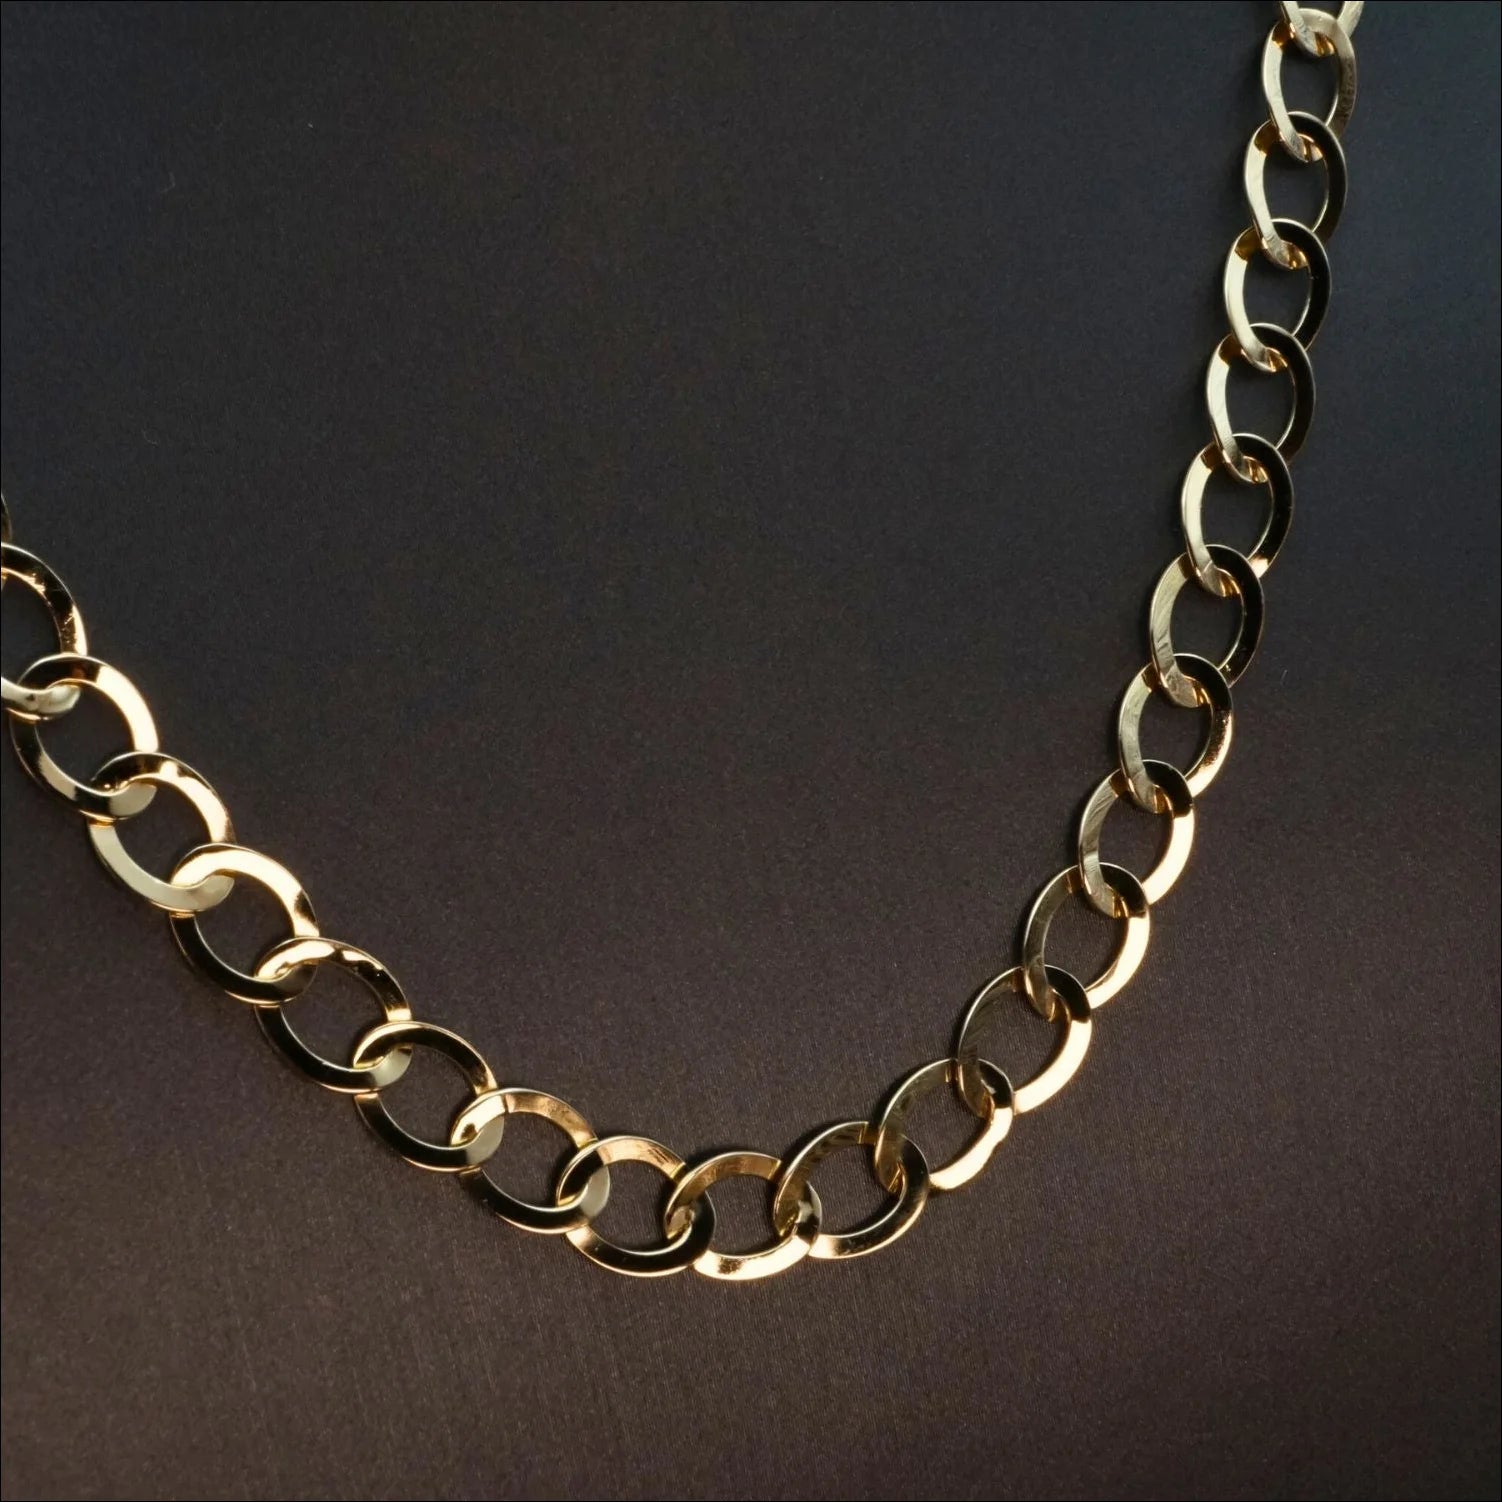 18k gold link chain - classic style | Above $1000